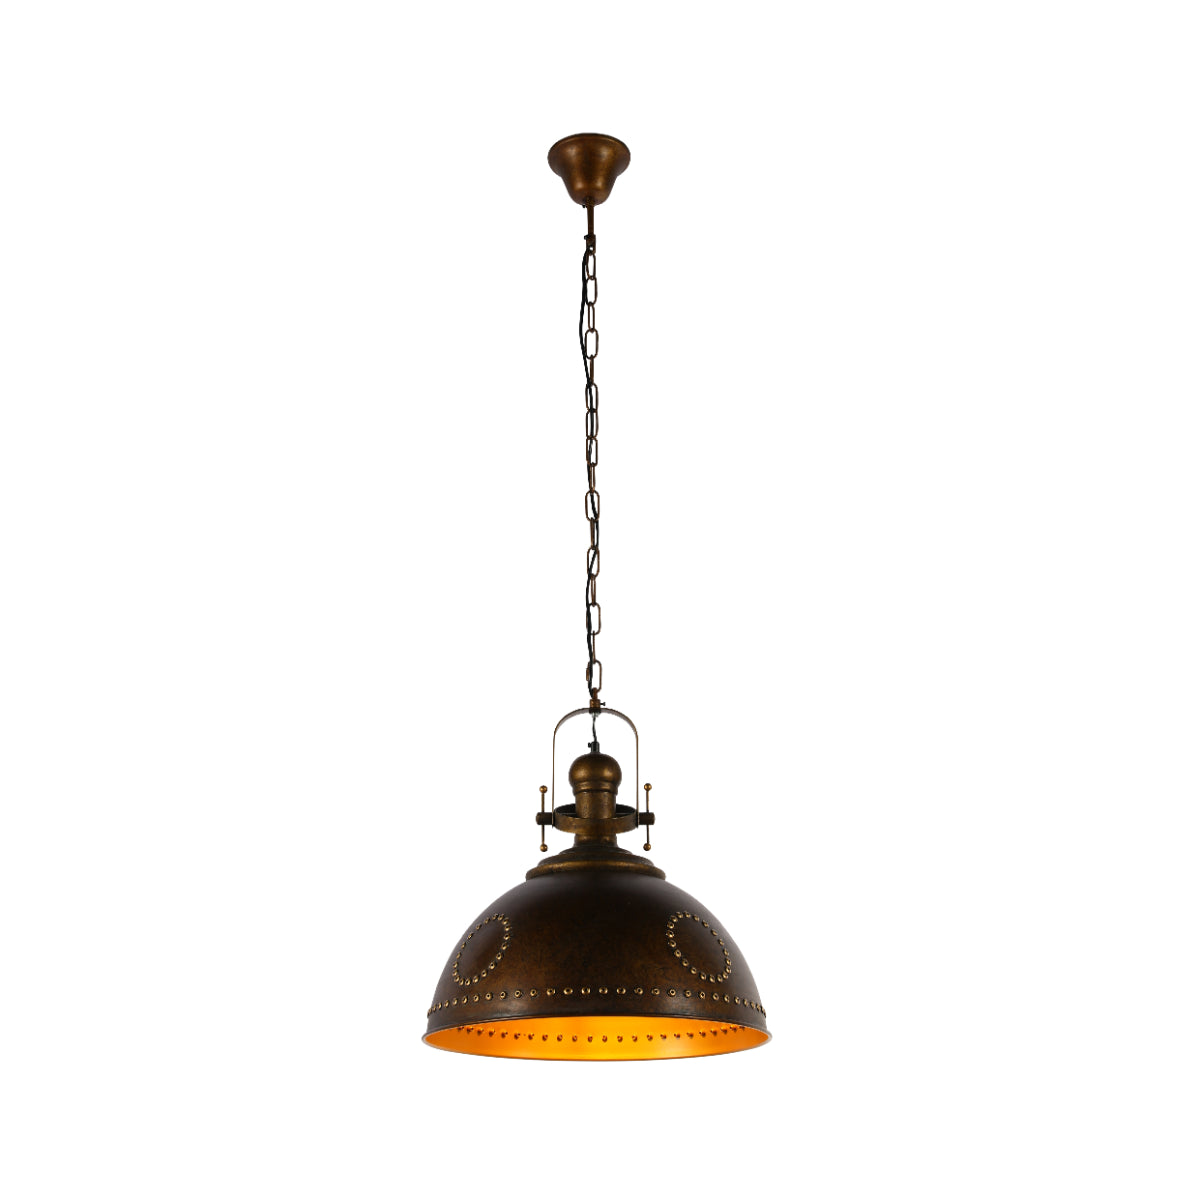 Main image of Vintage Industrial Dome Pendant Light with Rivet Detailing 150-19032